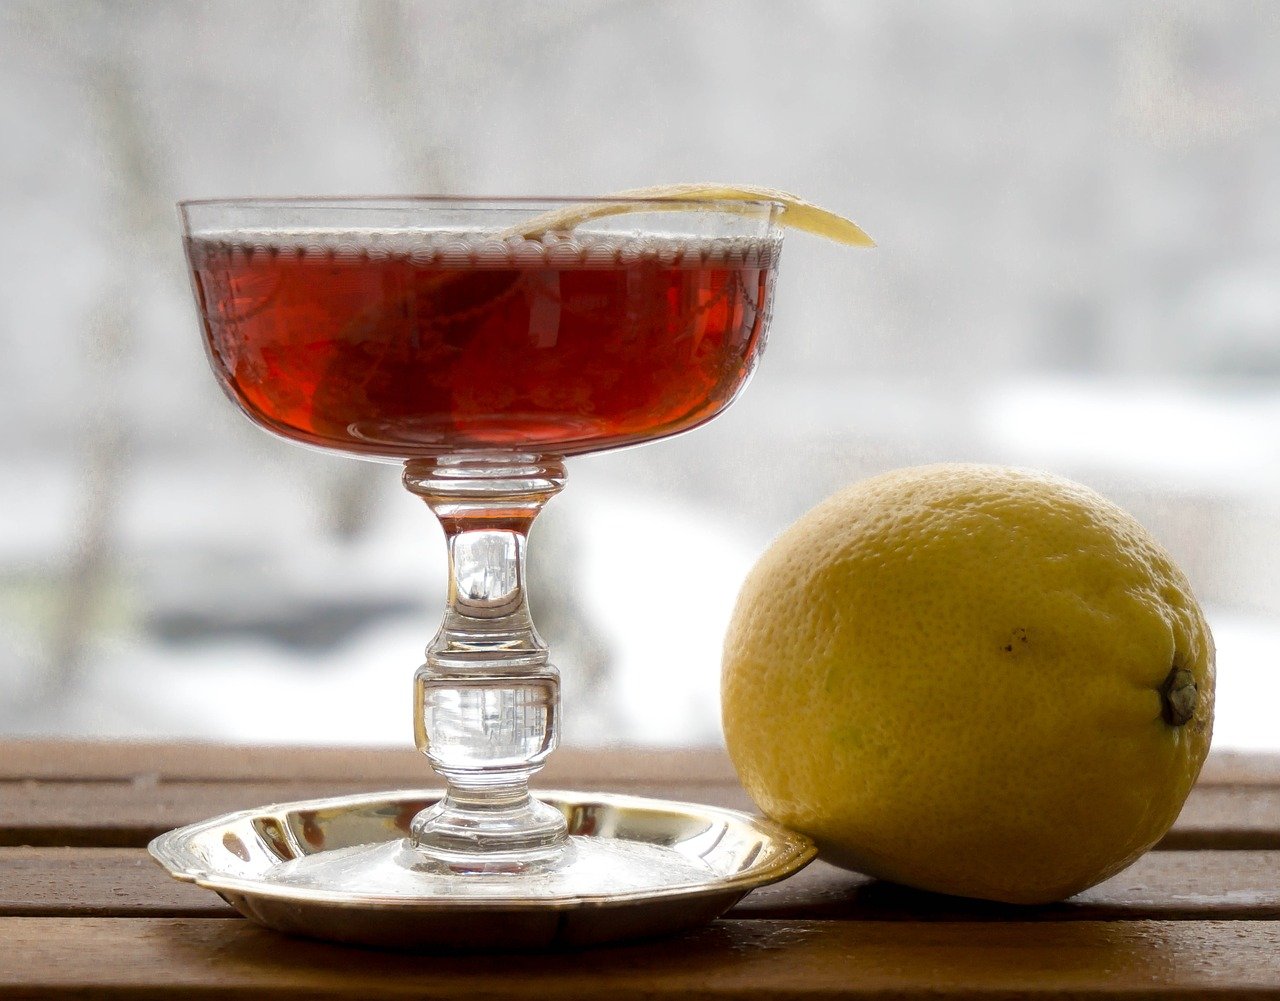 The Old Pal Cocktail, a twist on Classic Negroni Recipes, next to a lemon